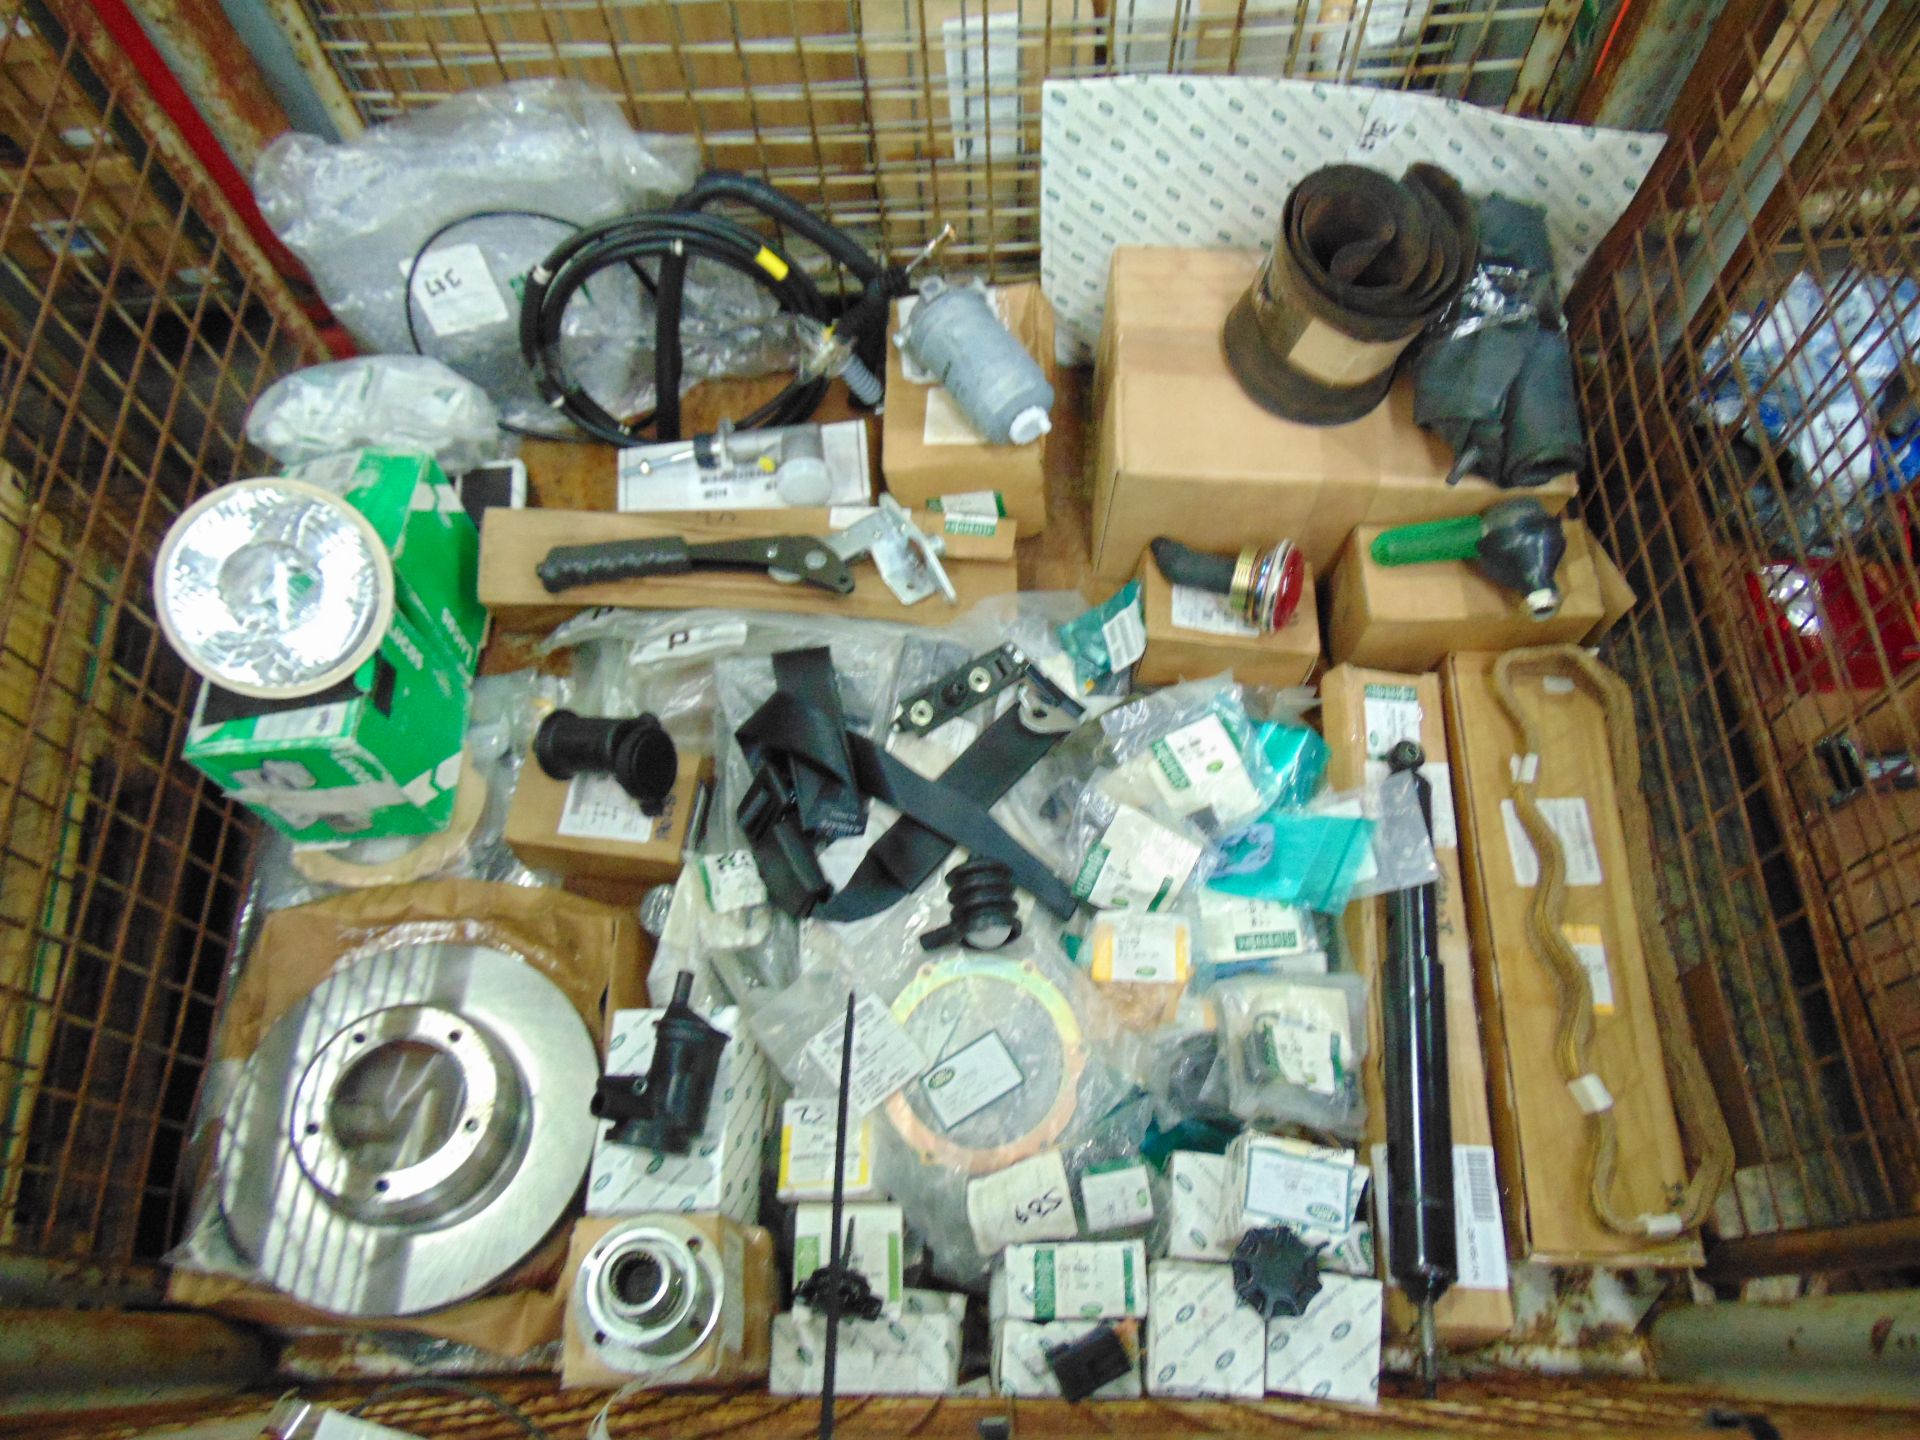 Mixed Stillage of Land Rover Parts